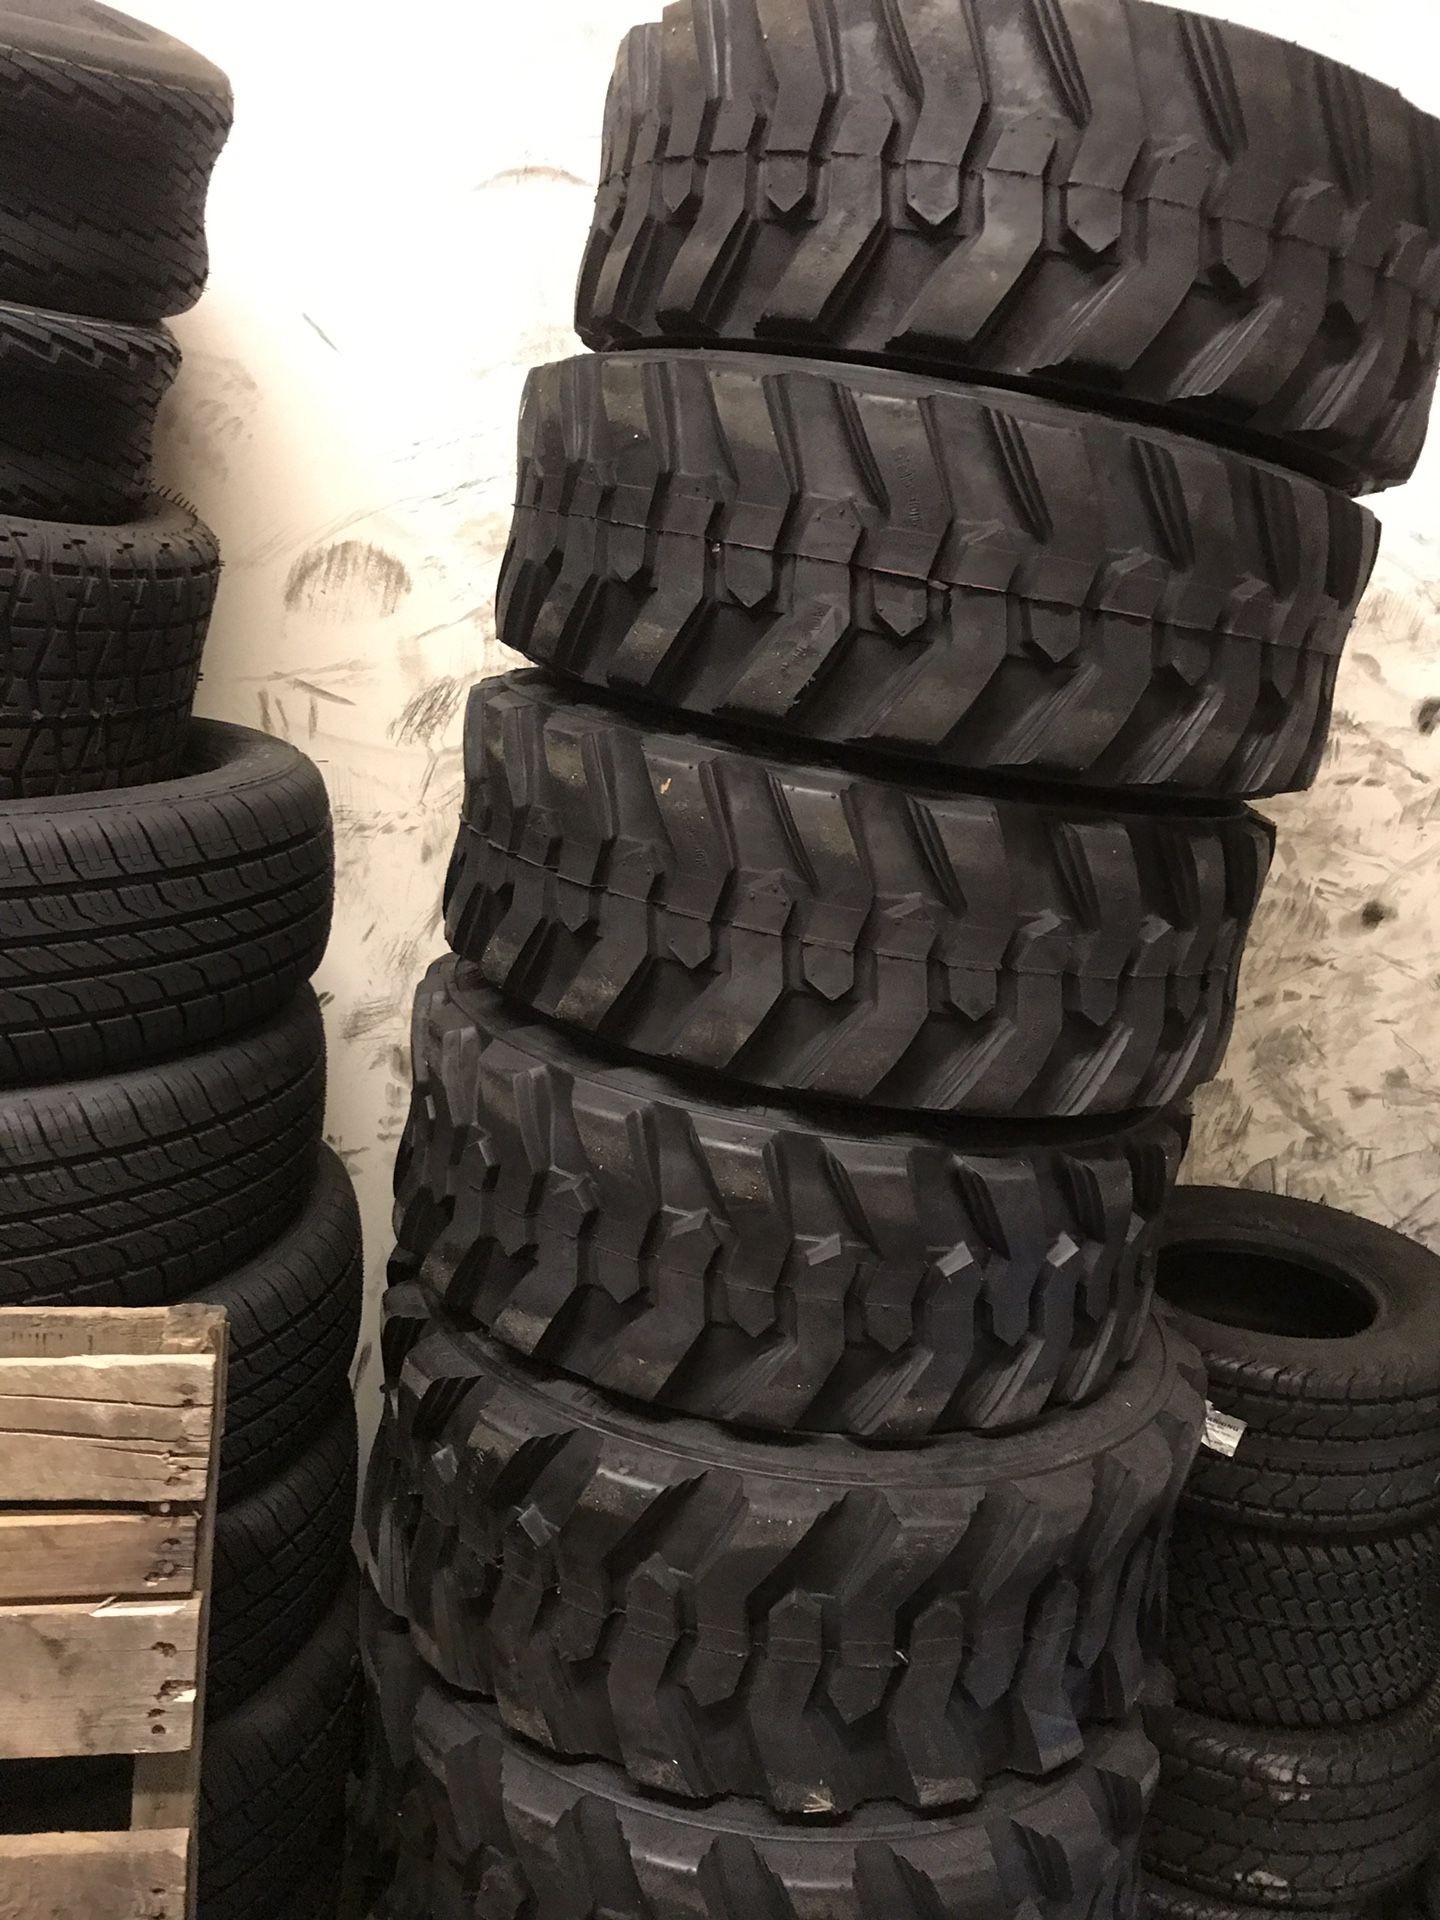 4x skid steer tires 12-16.5 14 ply $710   no bargain price firm if you bargain no reply